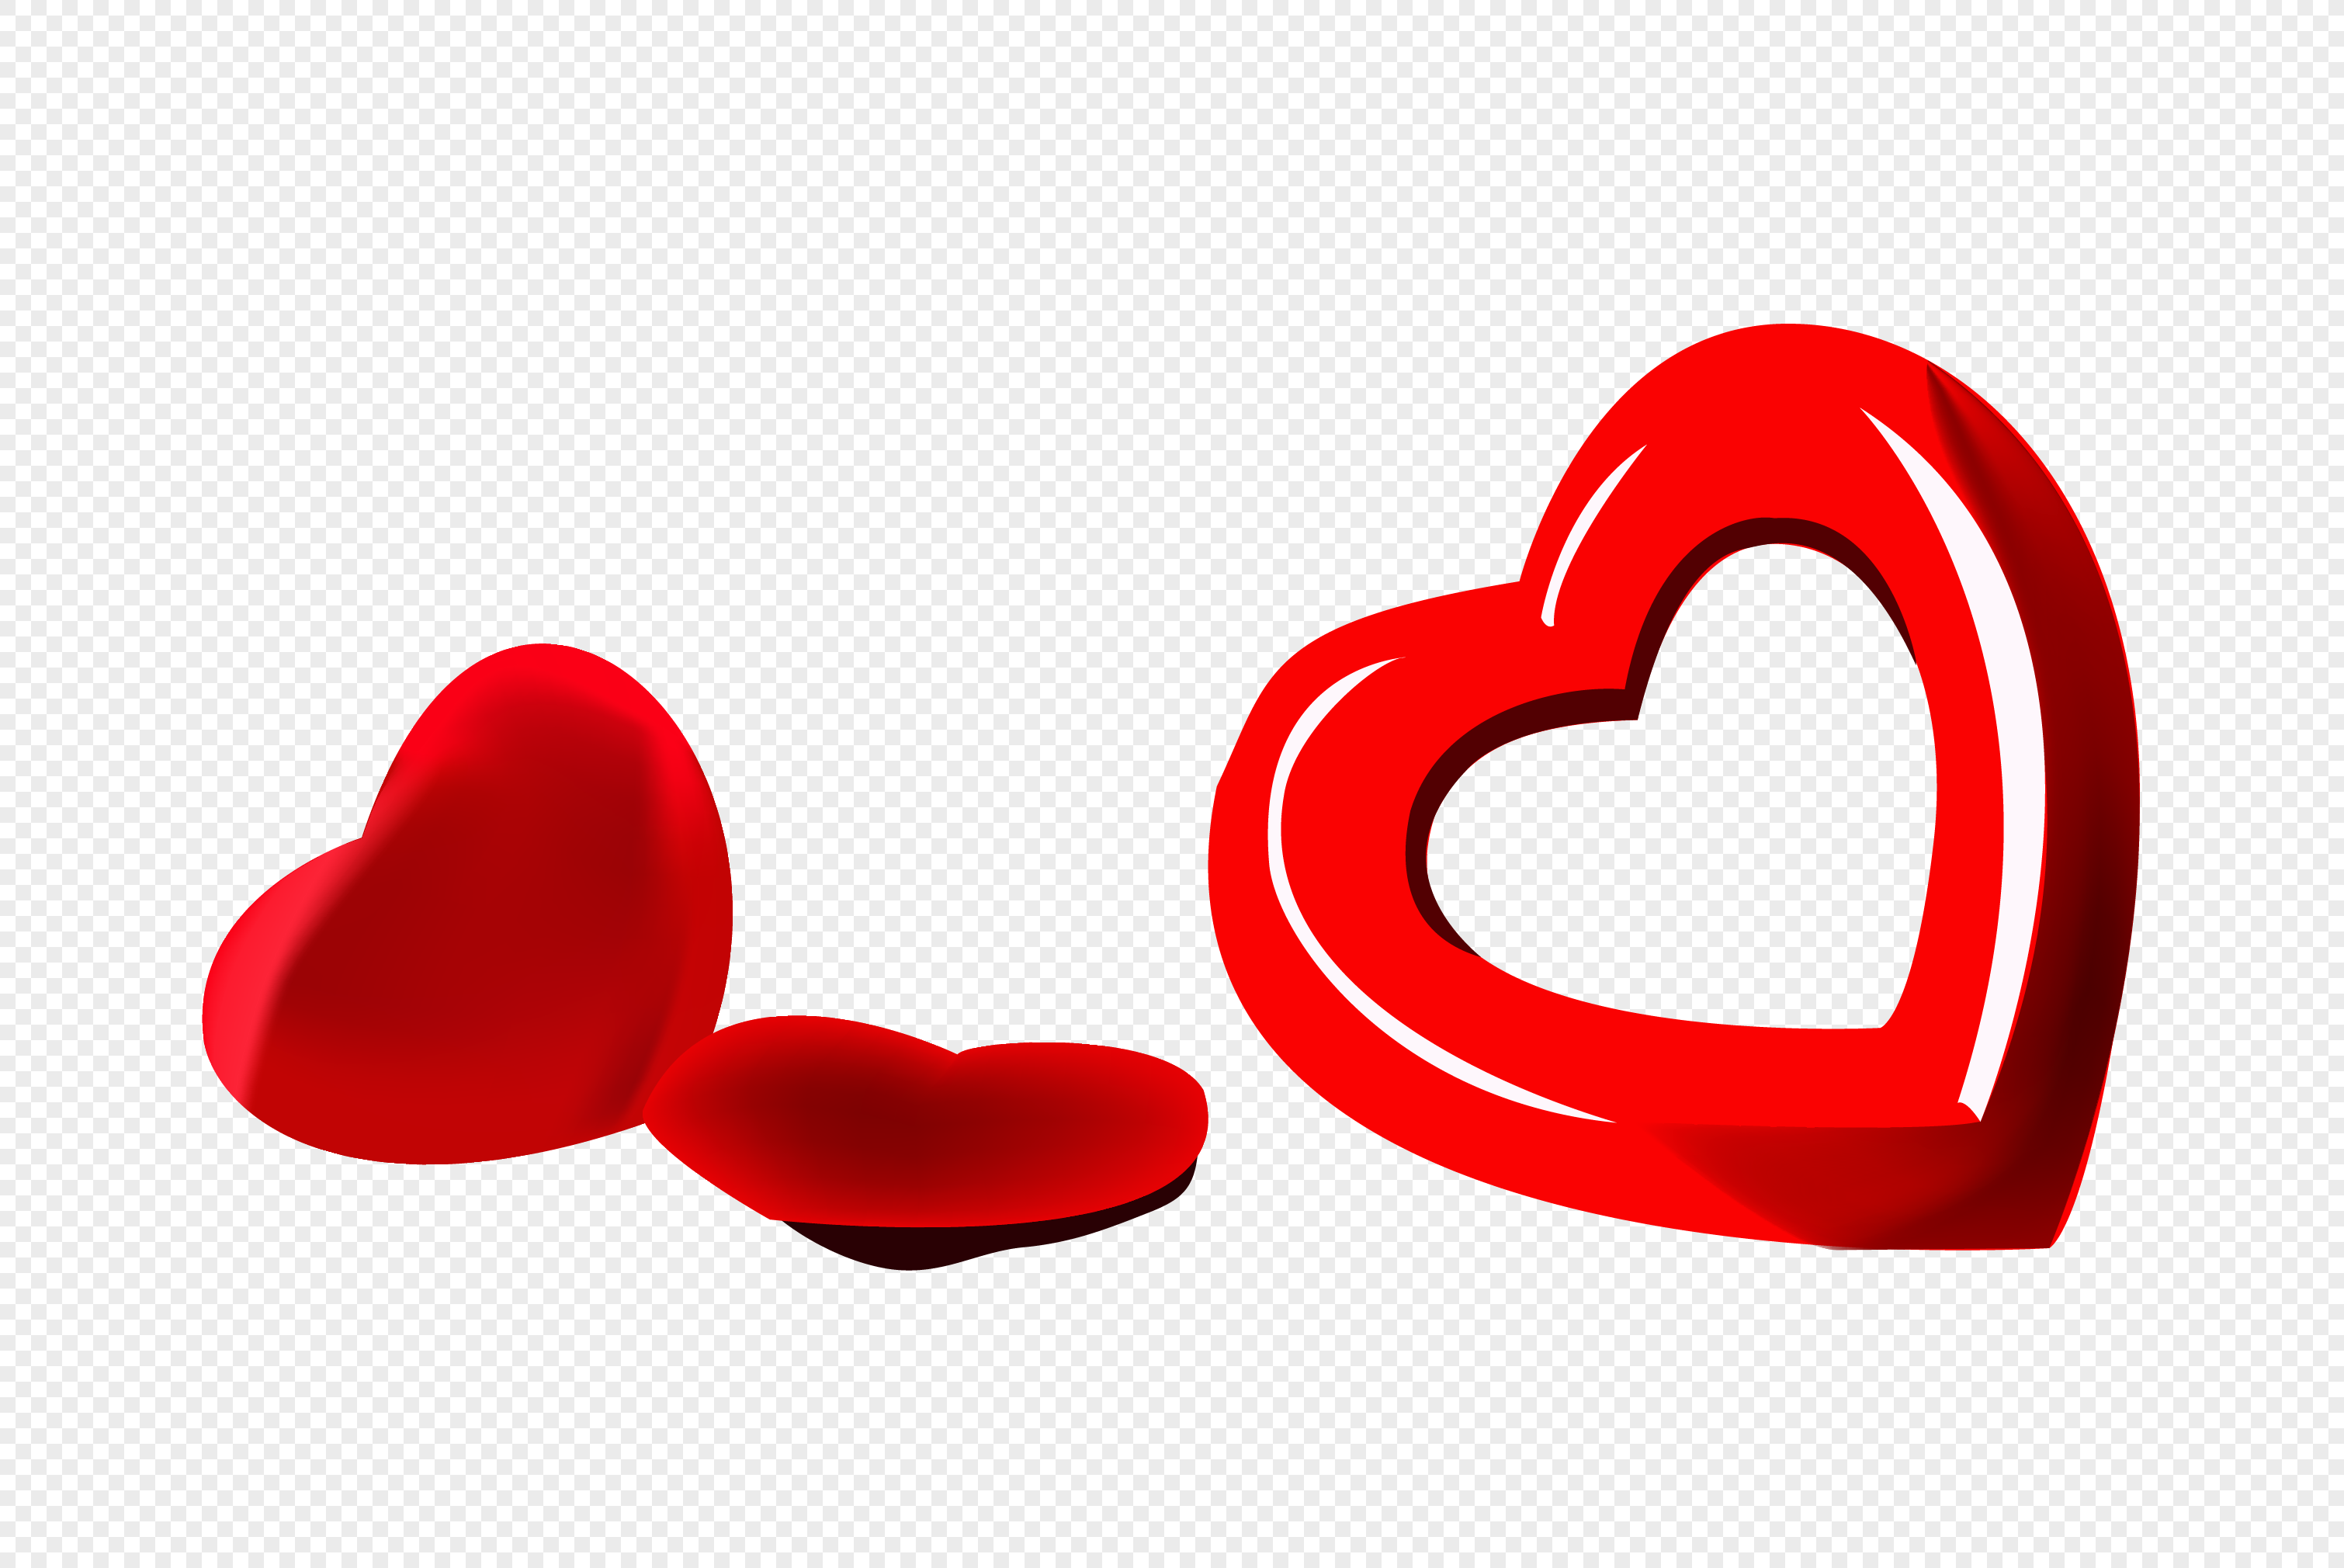 Two hearts png images